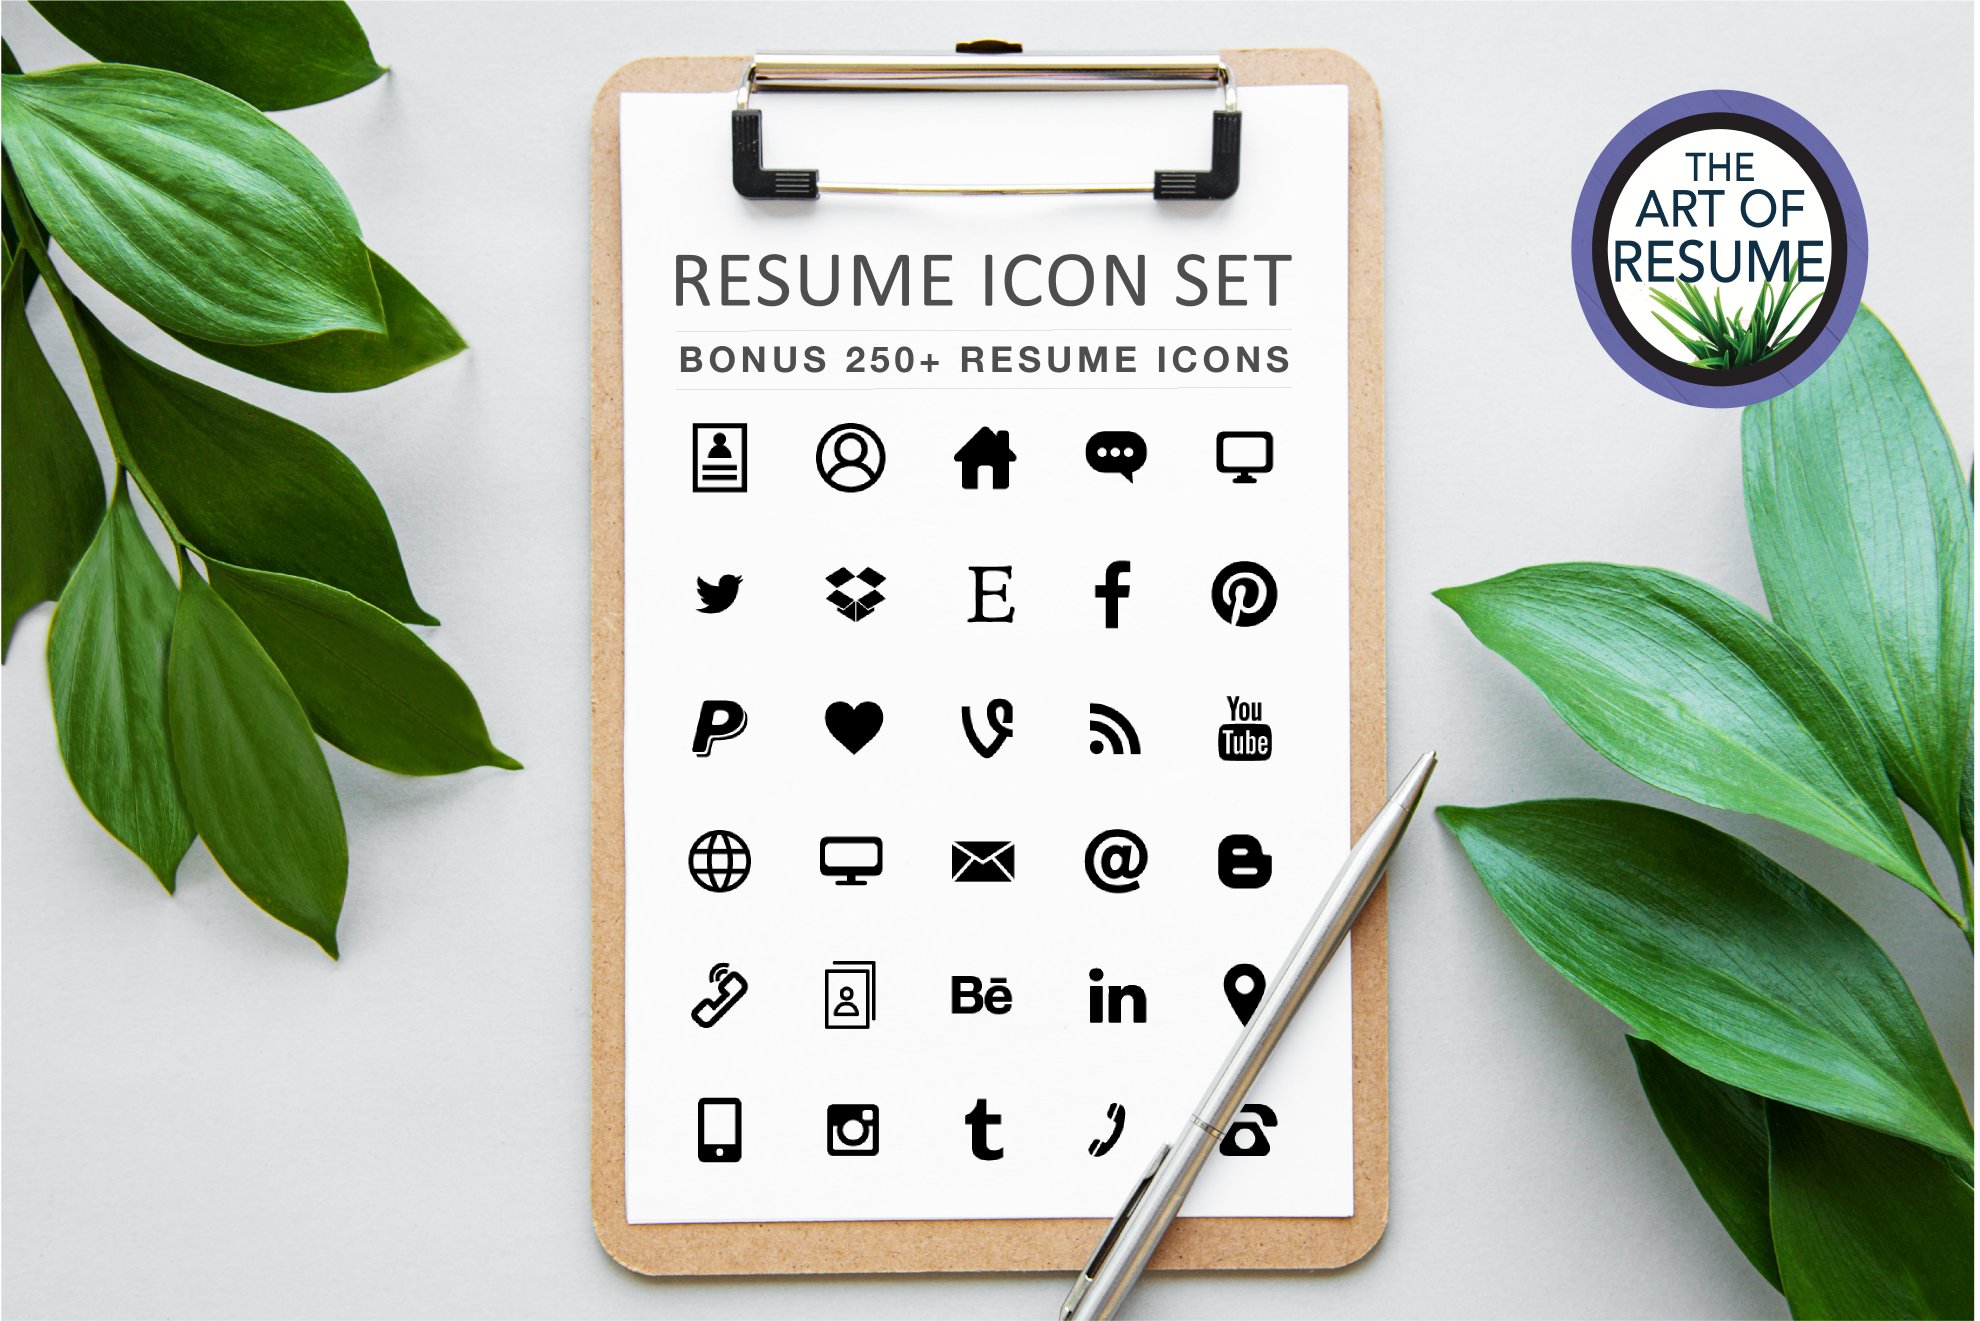 Clipboard with a list of resume icons on it.